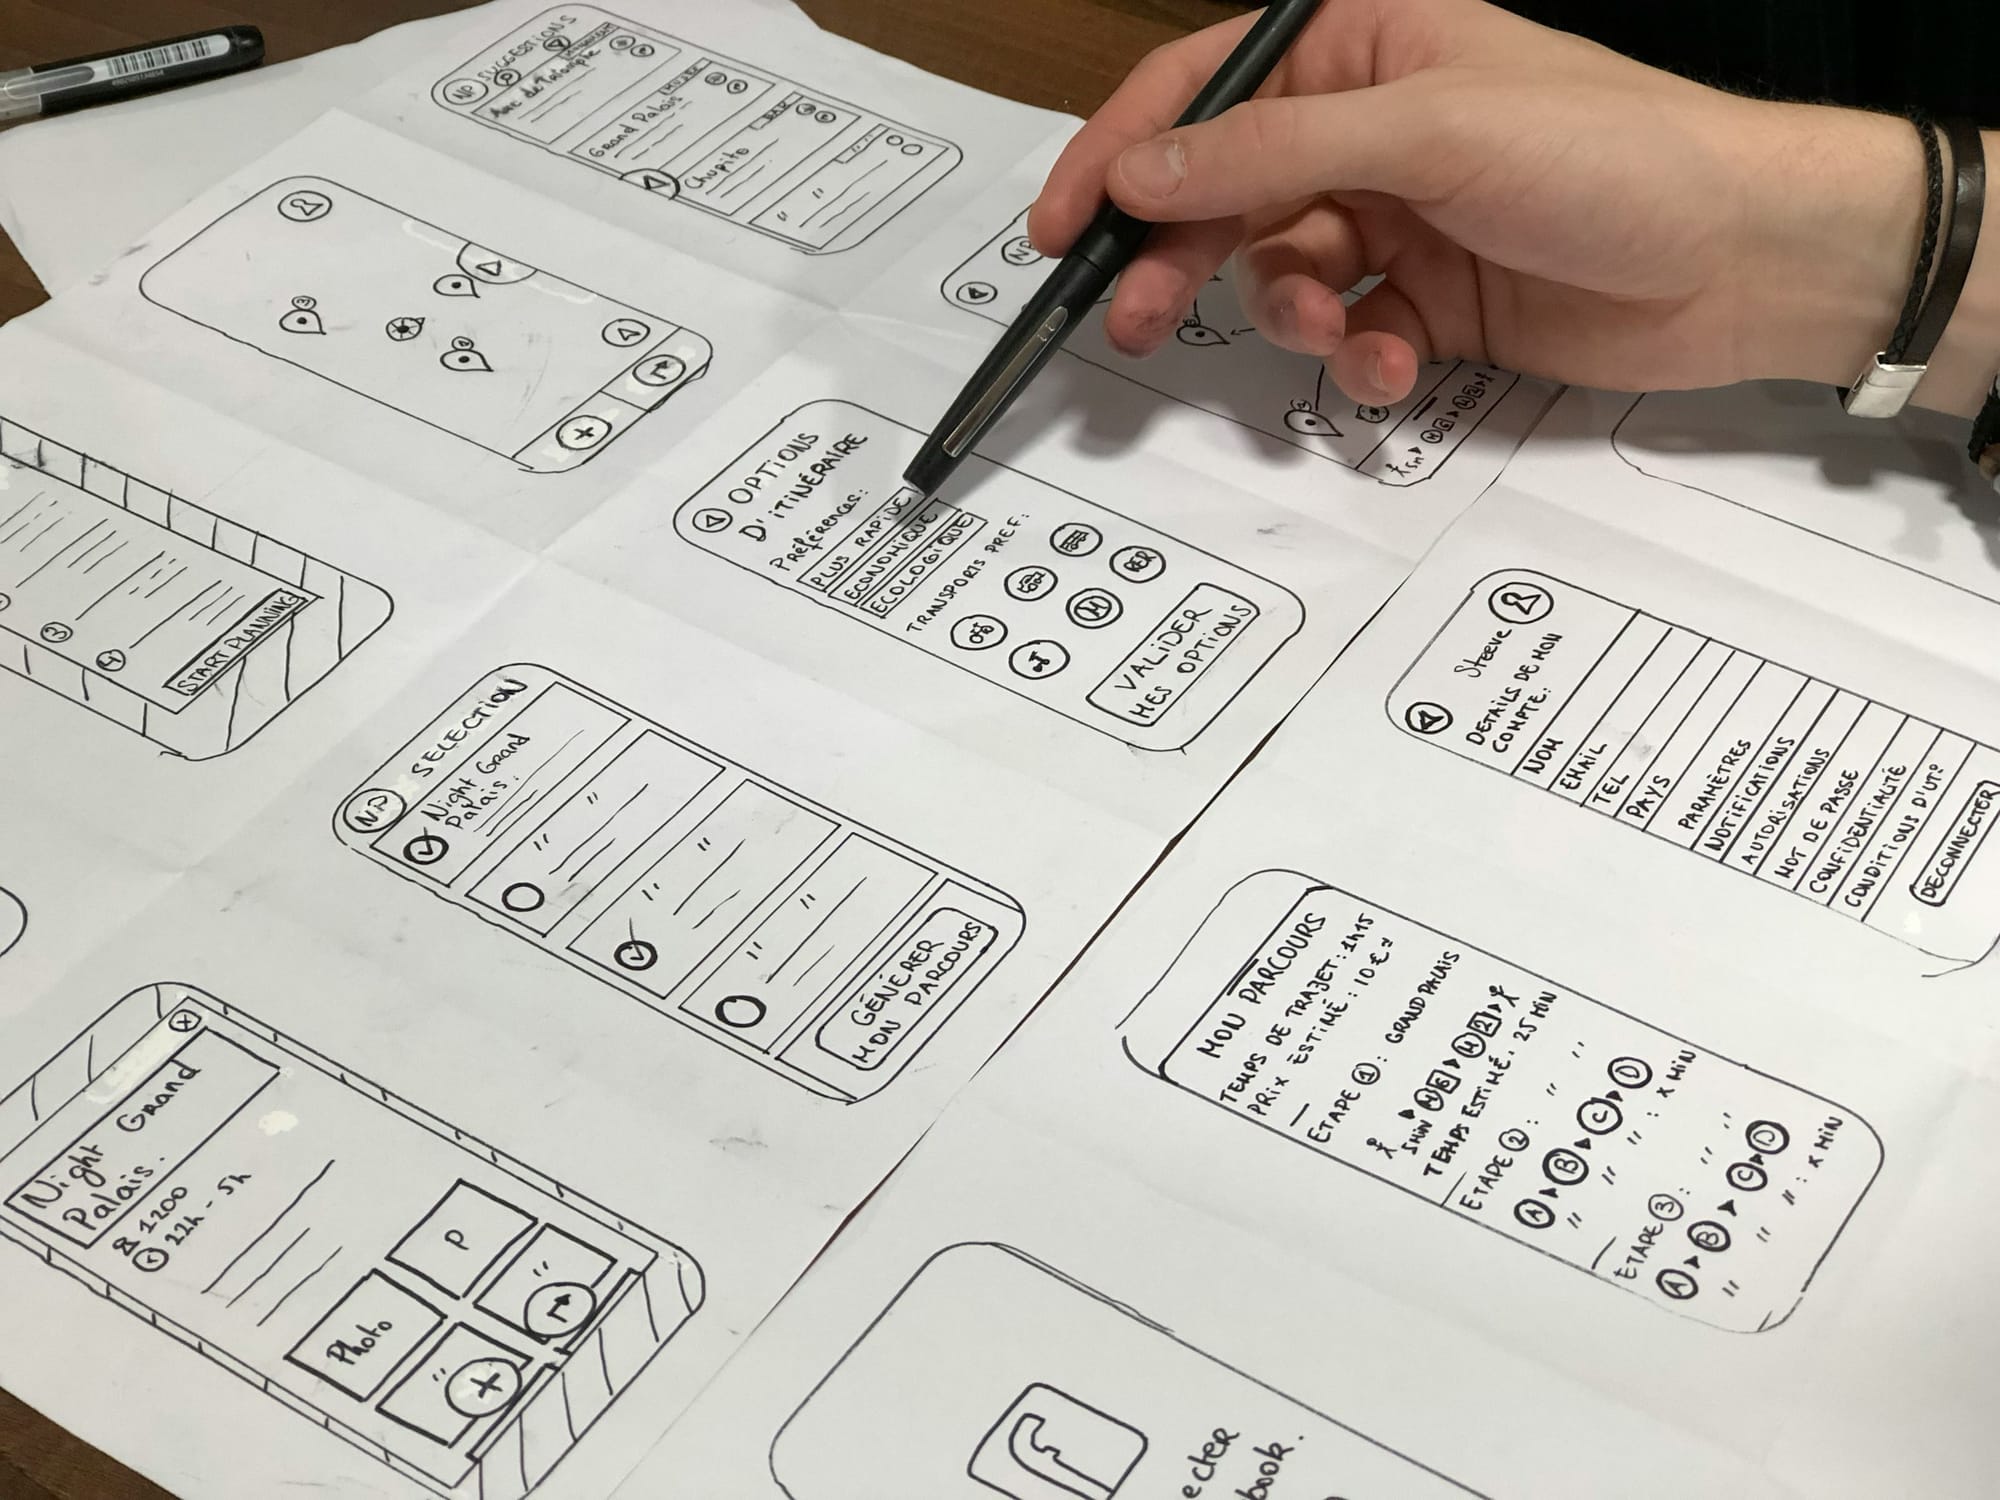 Wireframes help convey the product vision clearly